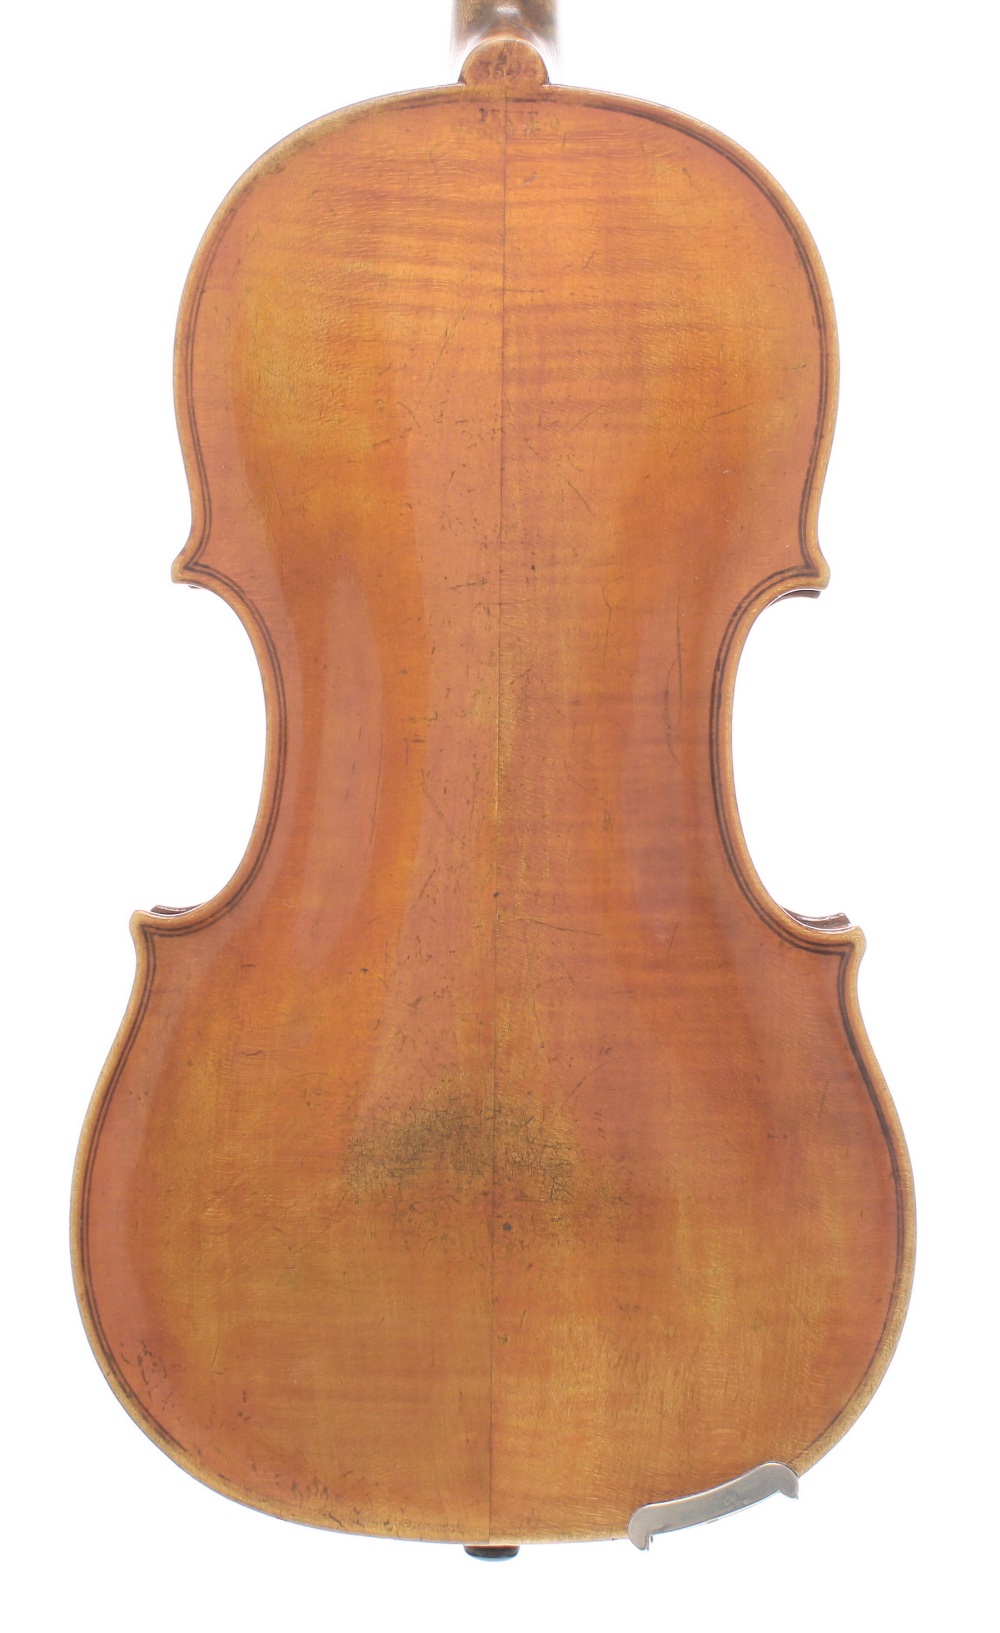 Irish violin by and labelled Made by Thos. Perry and Wm Wilkinson, Musical Instrument Makers, no. 4, - Image 2 of 3